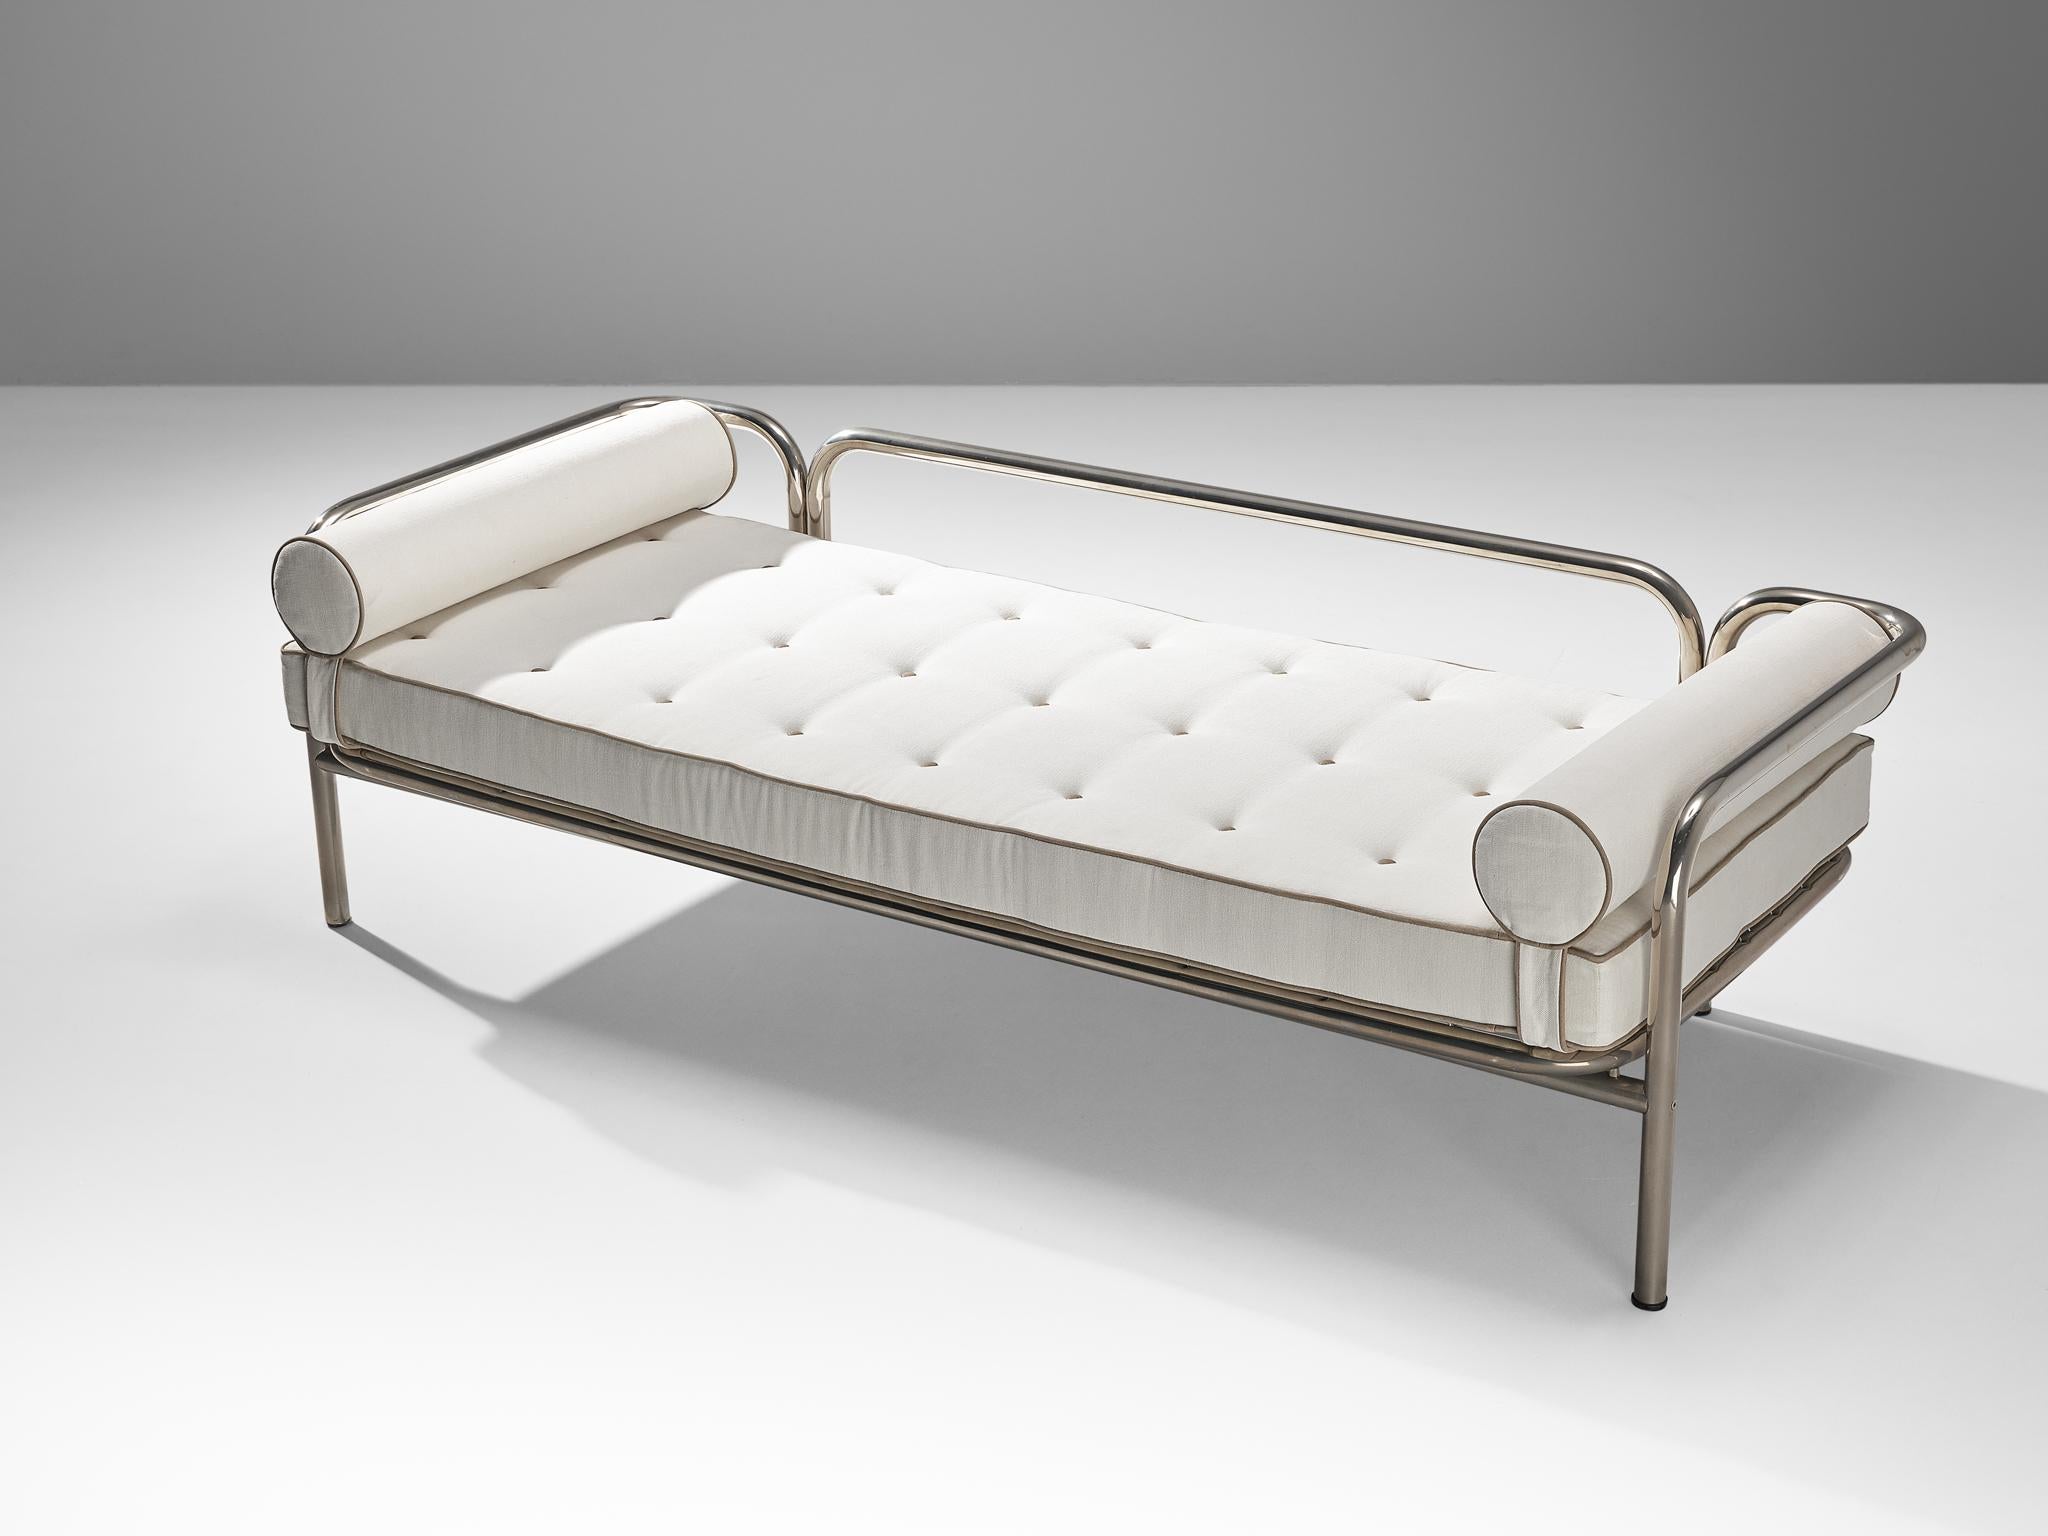 Gae Aulenti for Poltronova Production, daybed model 'Locus Solus', chrome-plated steel, Italy, 1964 

This daybed by Gae Aulenti is part of the 'Locus Solus' series created in 1964. The bed is based on a constructive frame that left out all possible